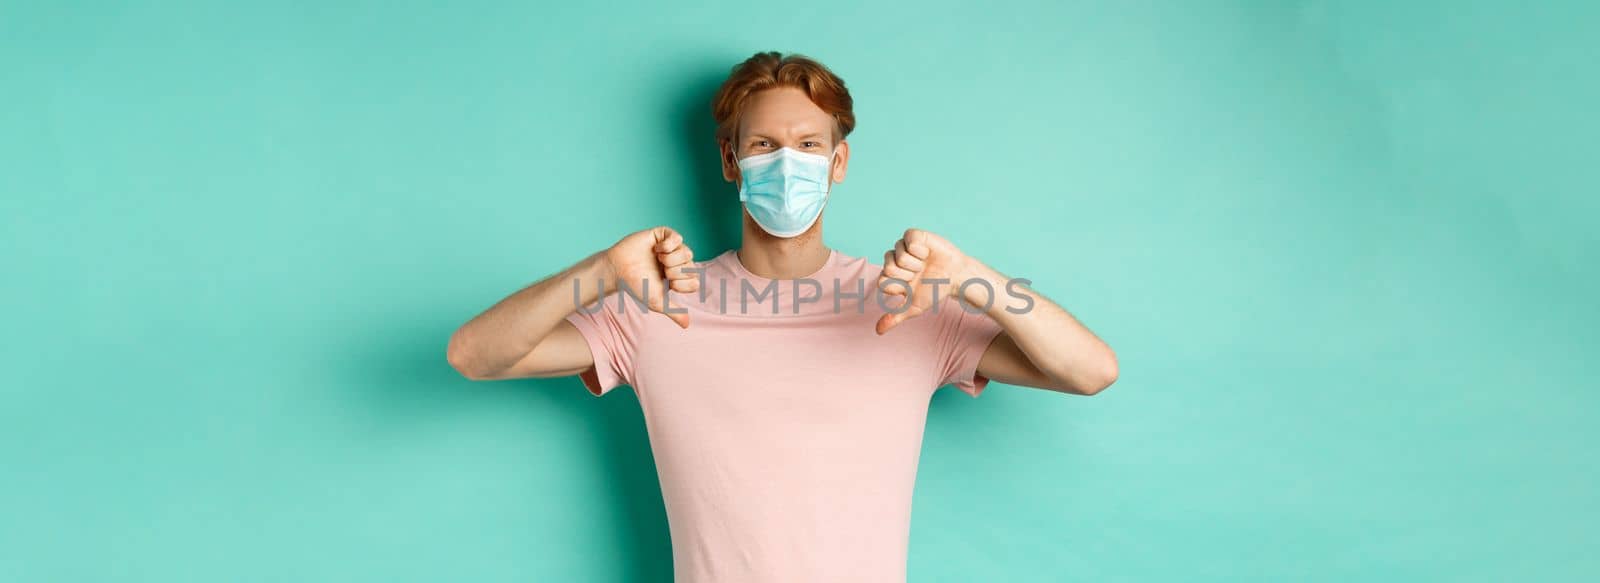 Covid-19, pandemic and lifestyle concept. Young man with red hair in face mask, showing thumbs down, dislike or disapprove something, standing over turquoise background.